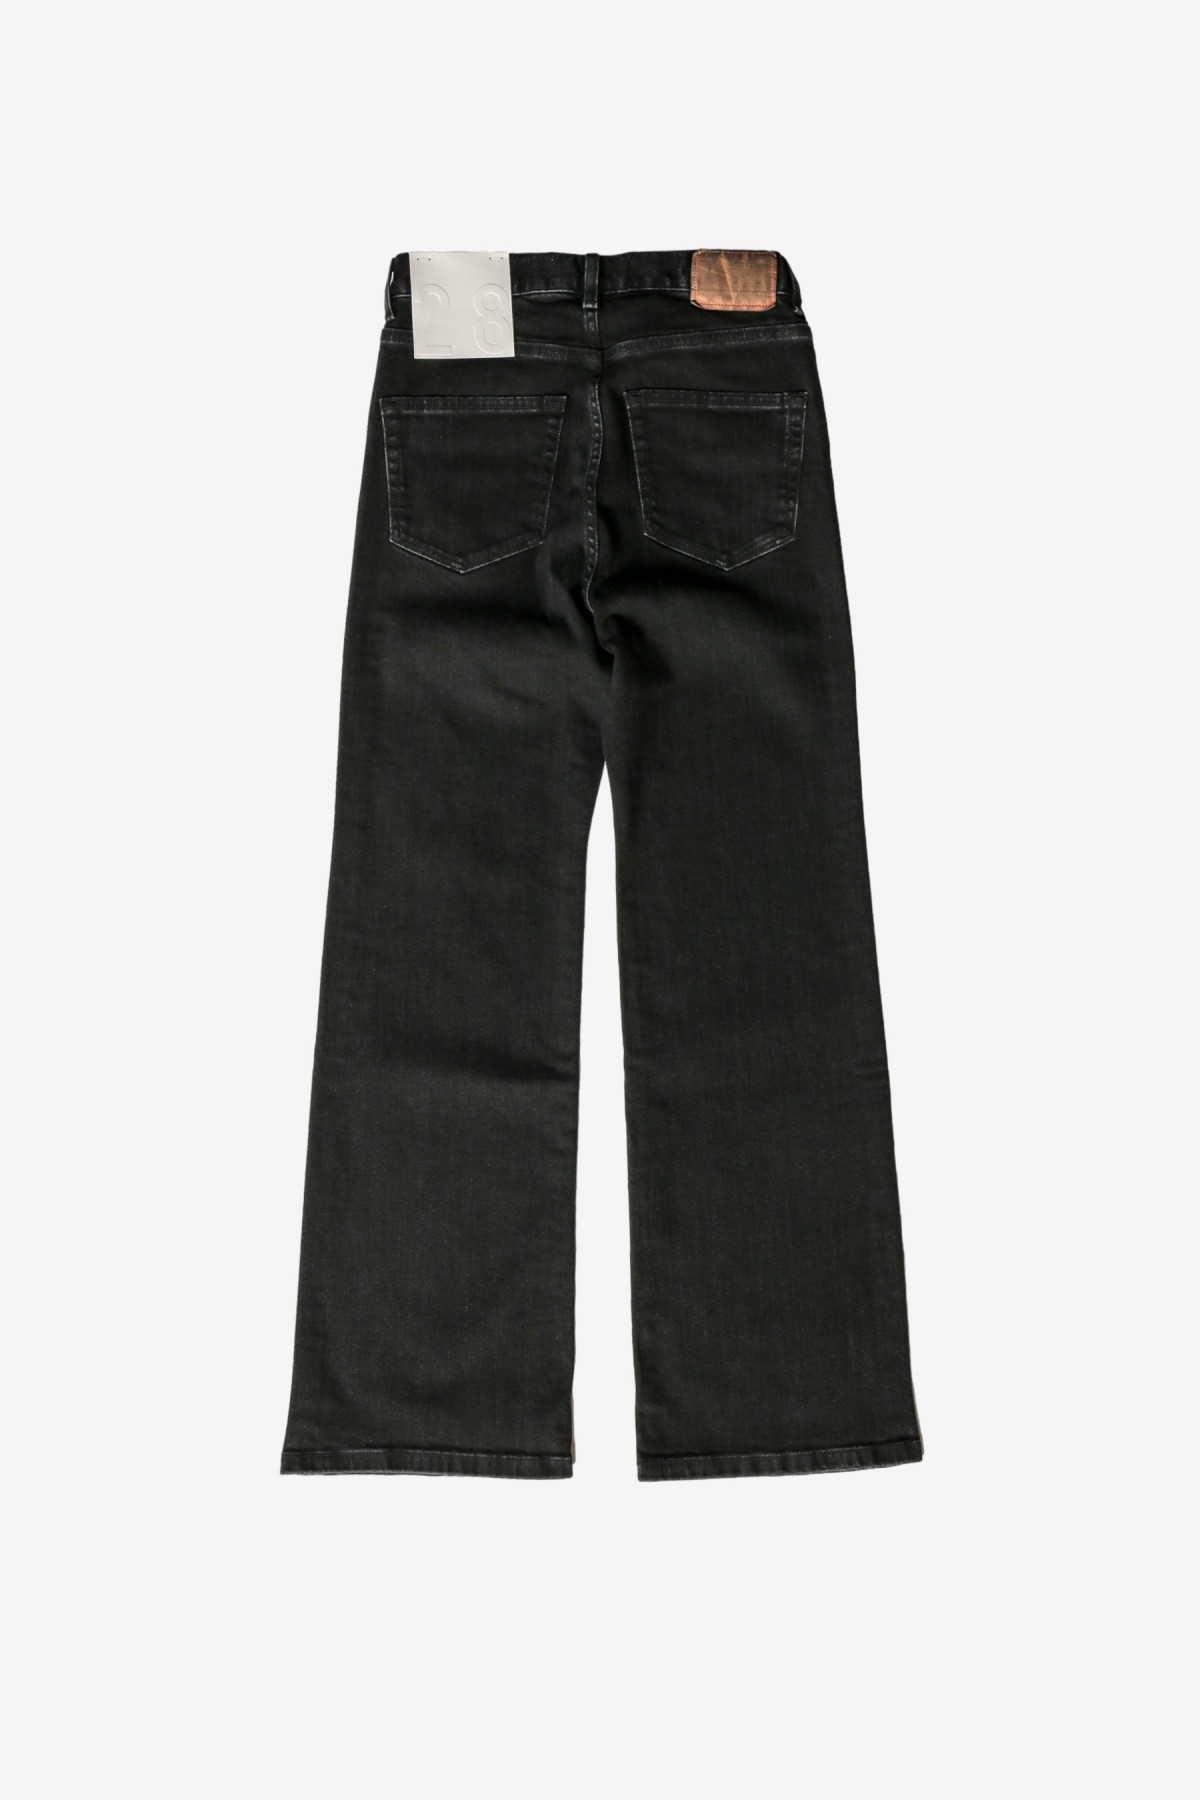 Jeanerica PW008 Pyramid Fit in Black 2 Weeks